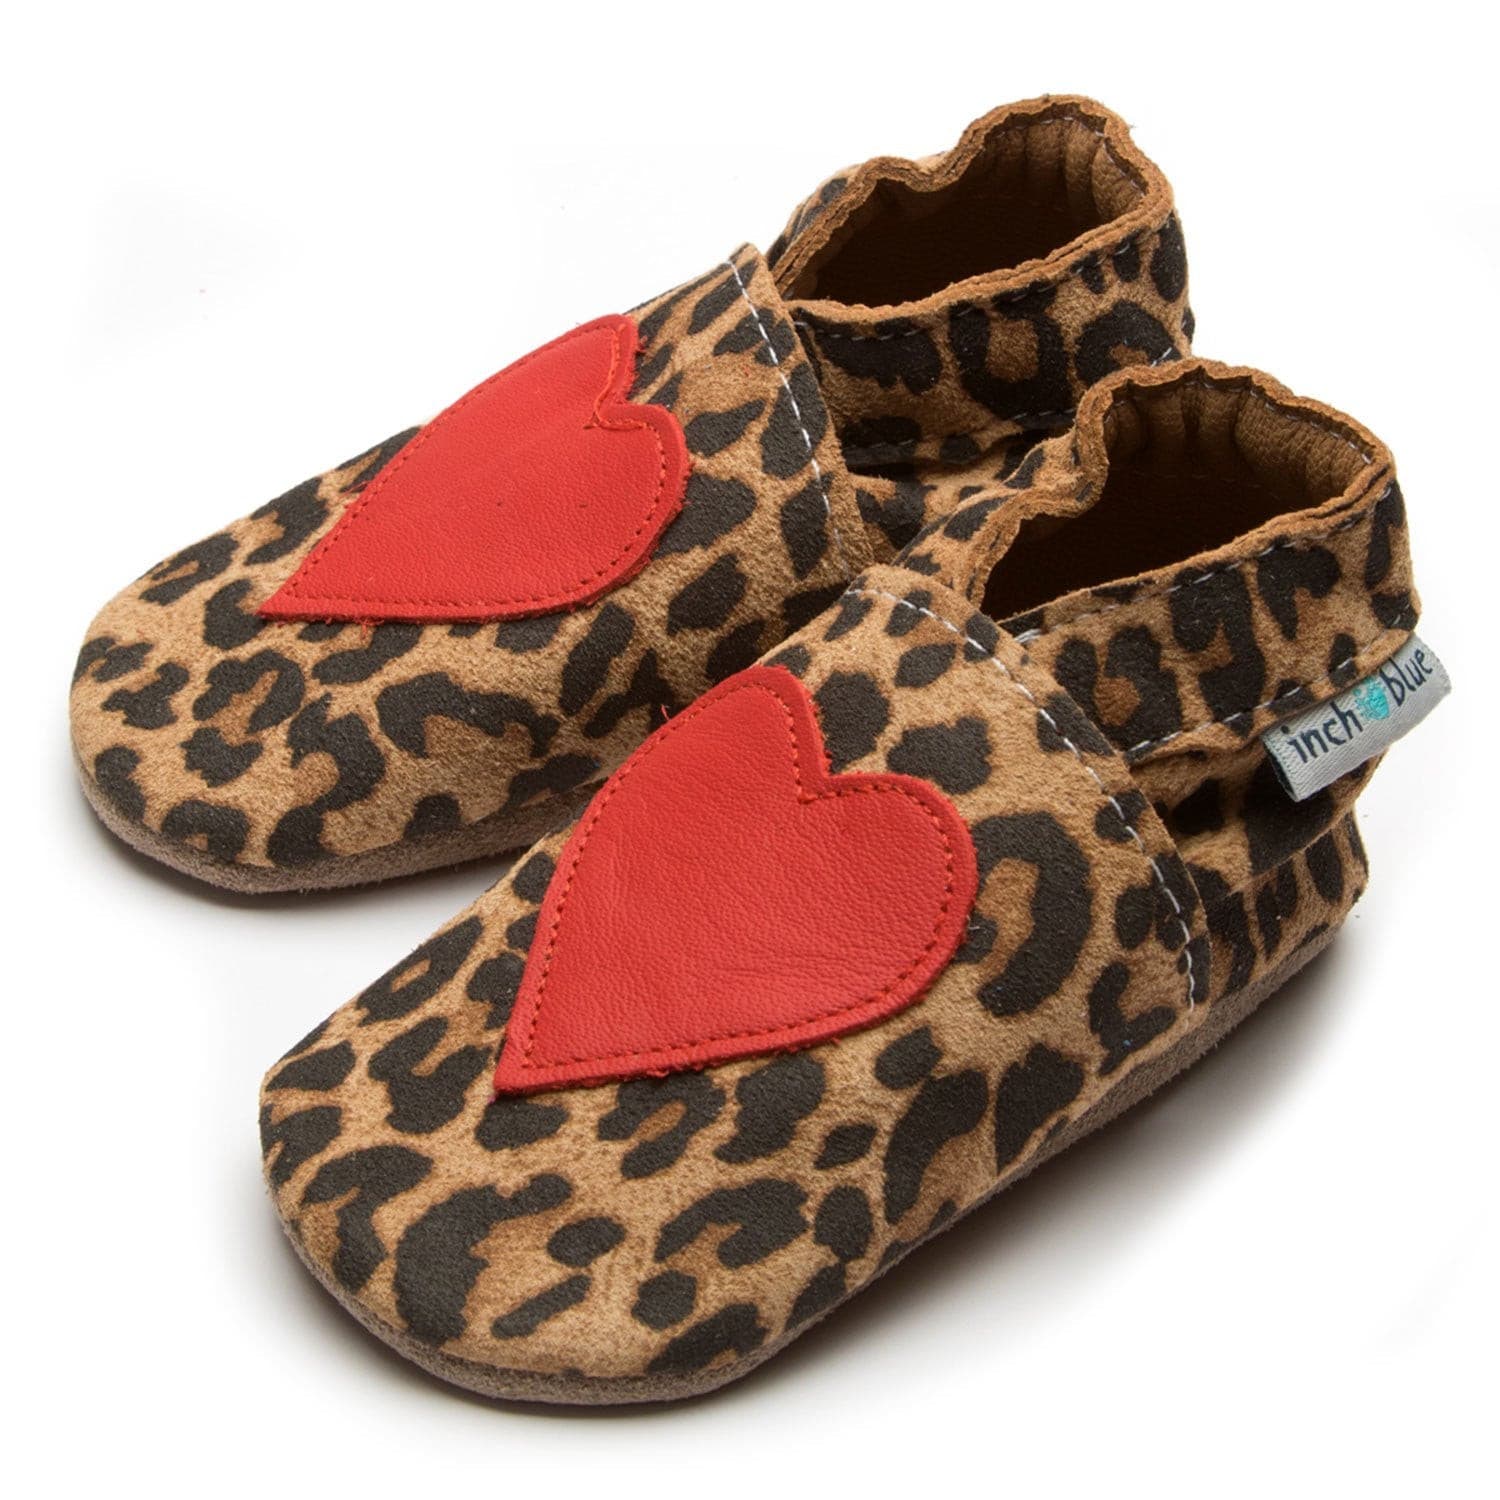 Leopard Print with Heart Soft Shoes.